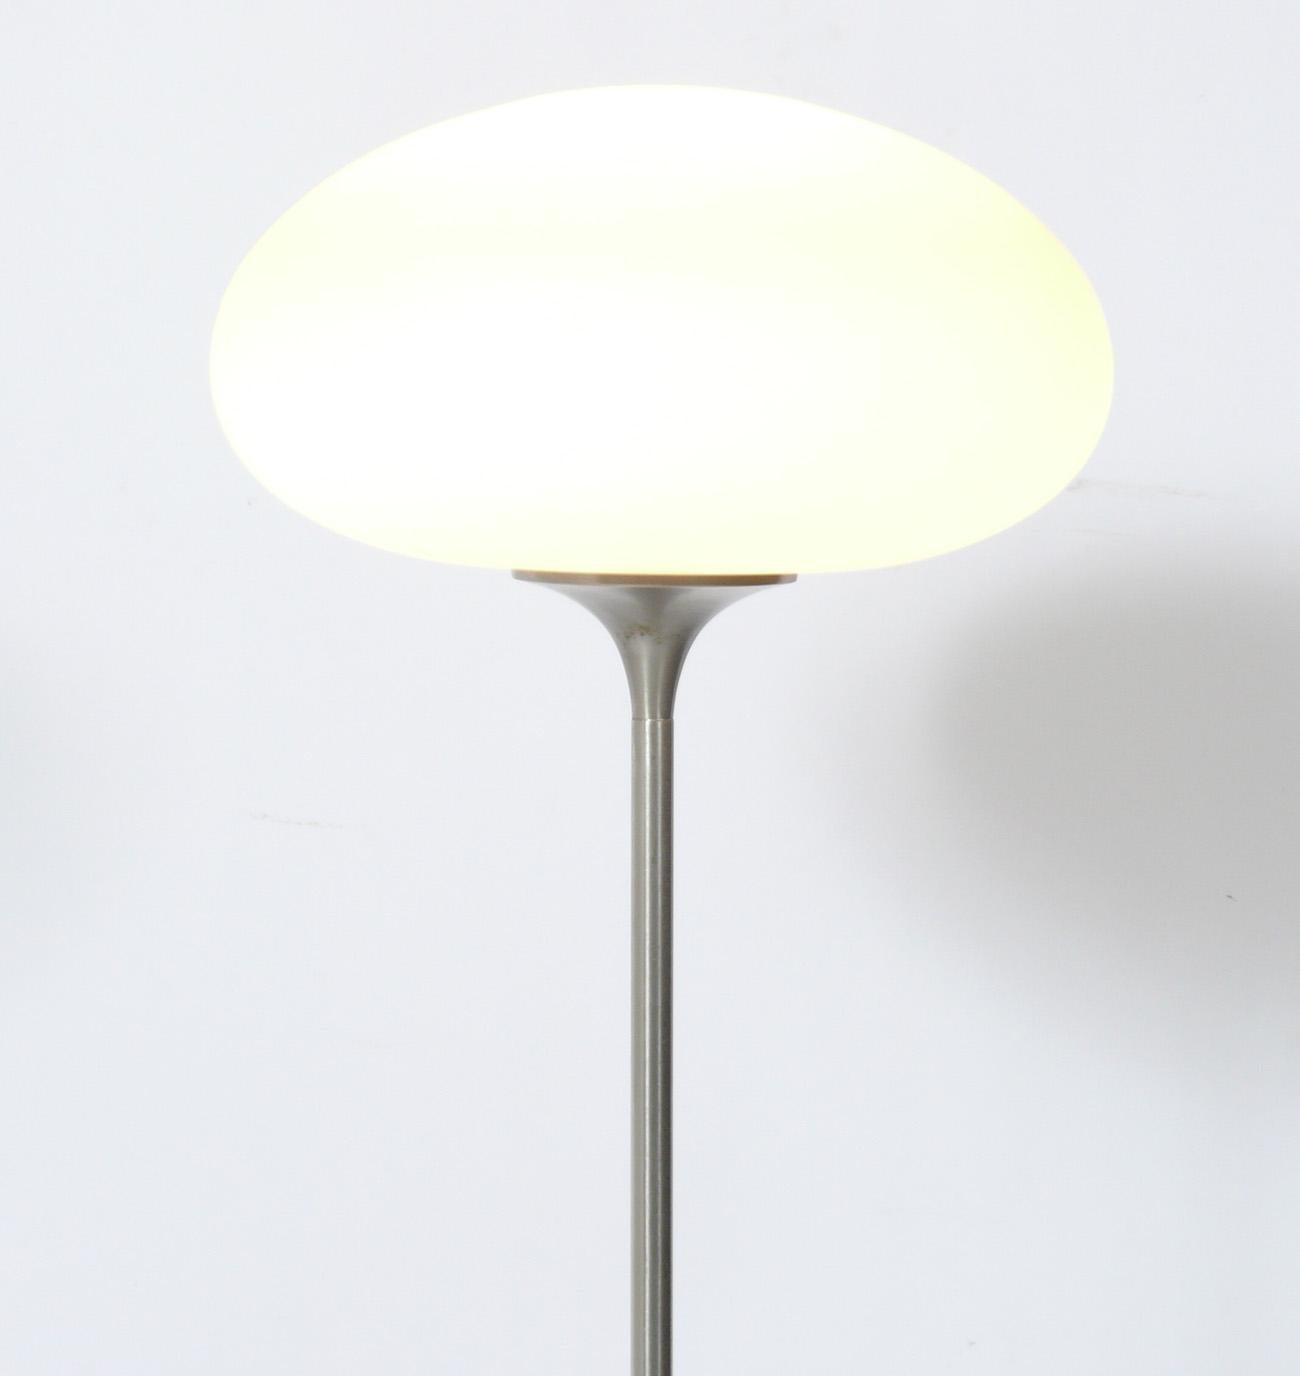 Iconic 1960s mushroom shade floor lamp, designed by Bill Curry for Laurel, American, circa 1960s. It is executed in brushed steel and retains it's original glass shade. It is rewired and ready to use.